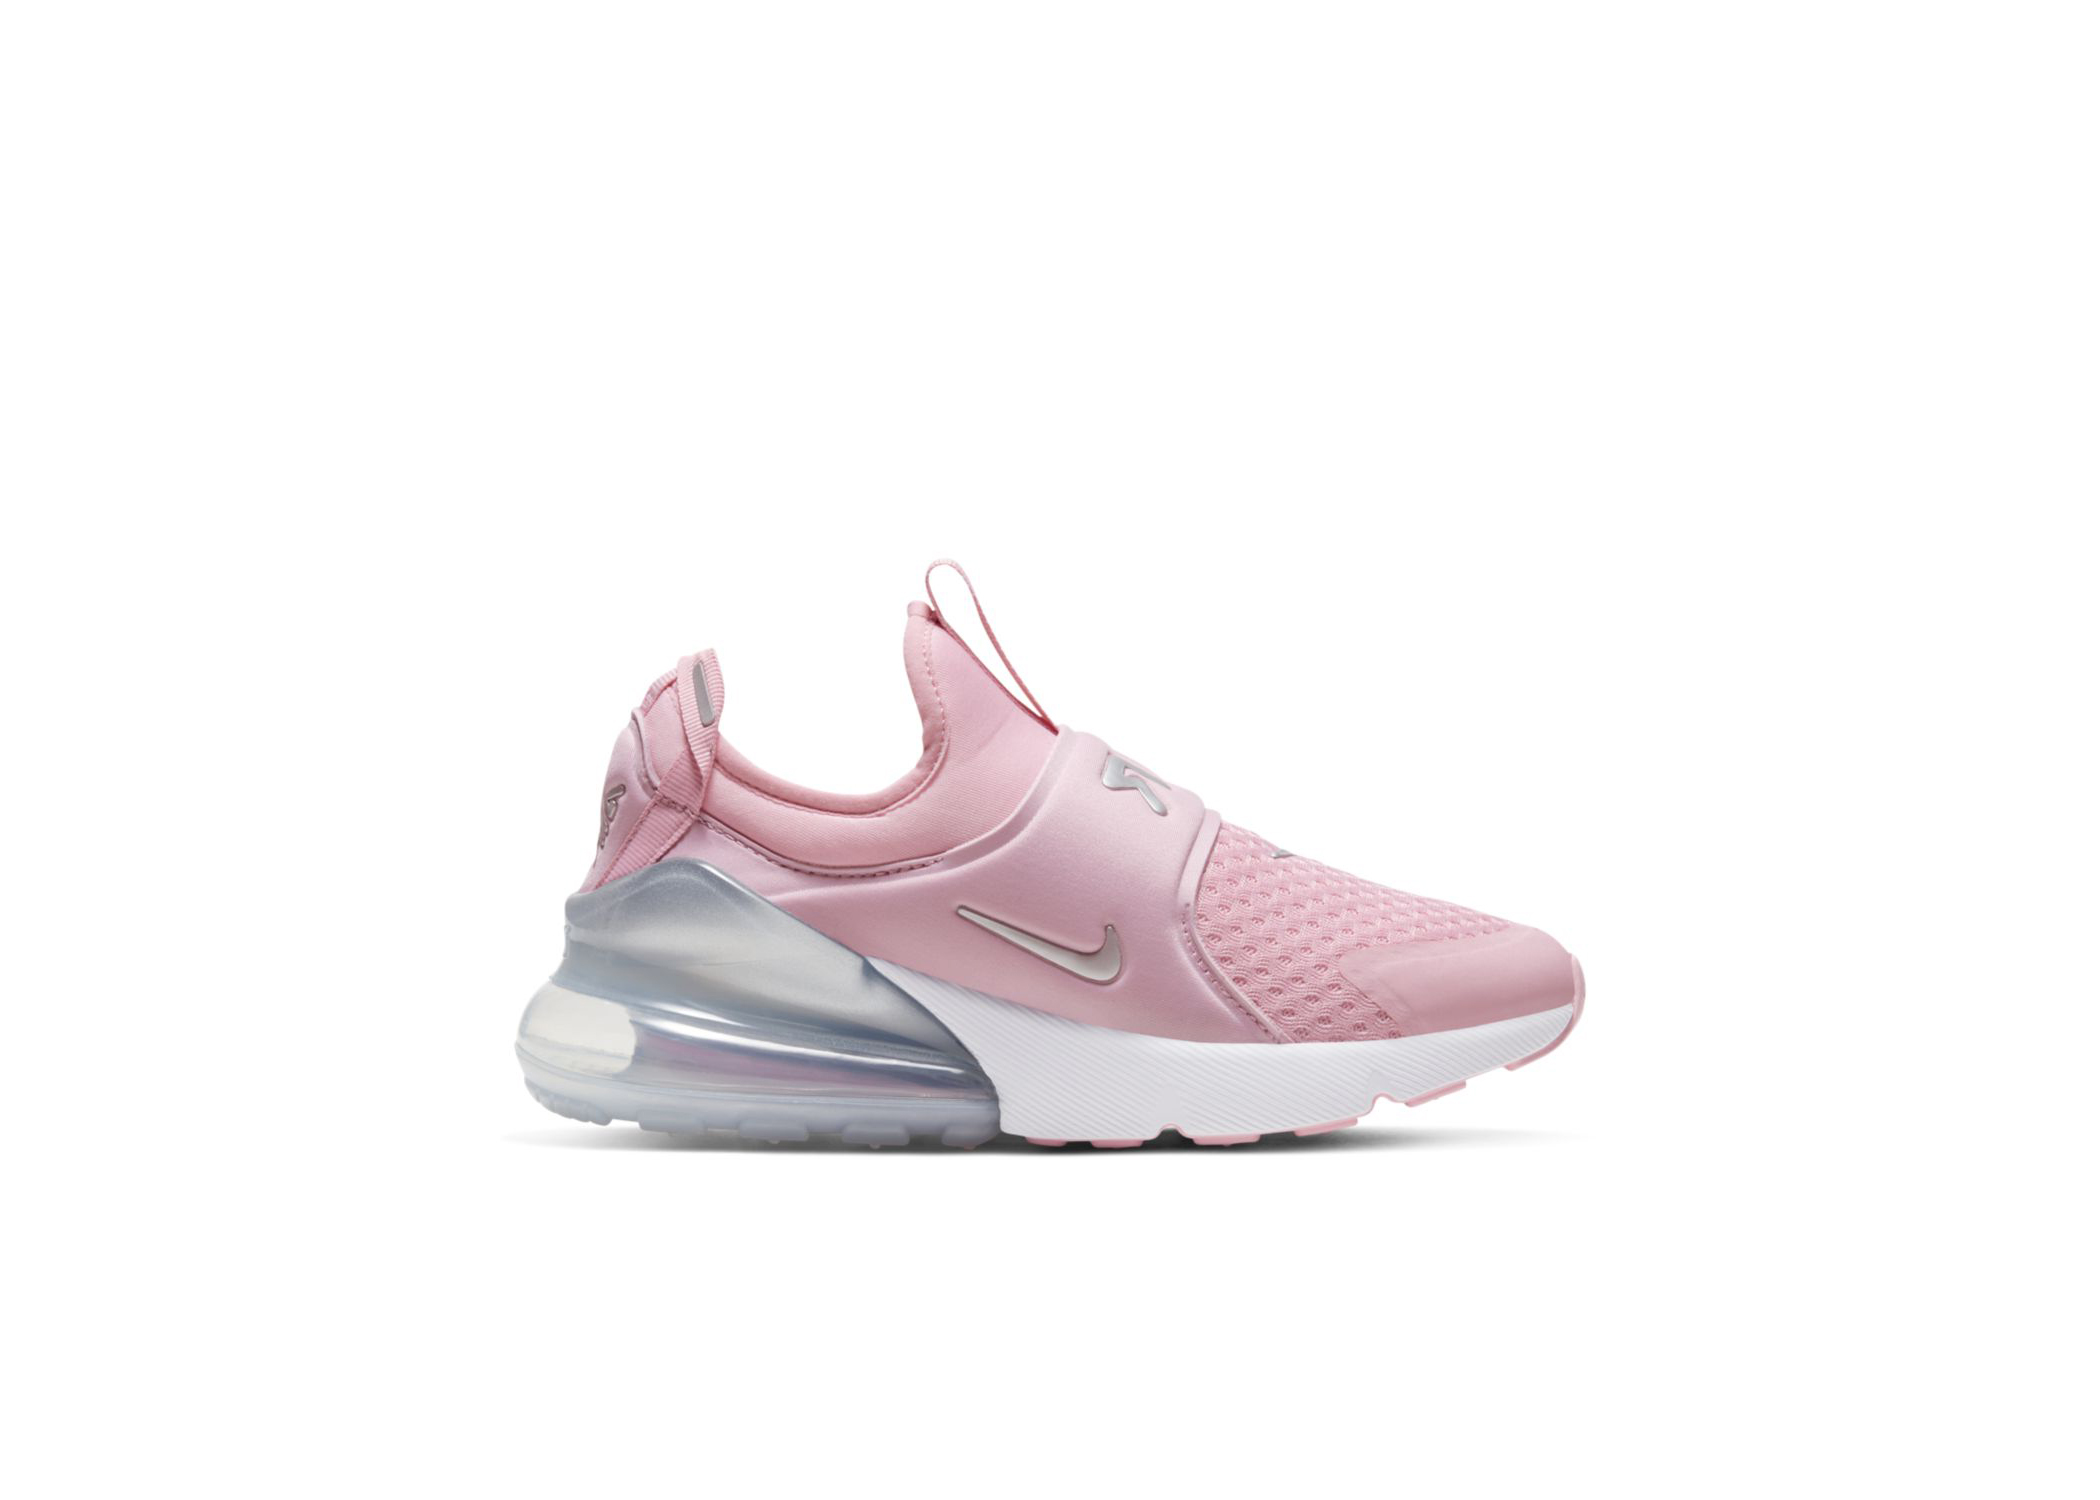 Nike Air Max 270 Extreme Pink (GS) - CI1108-600 - US